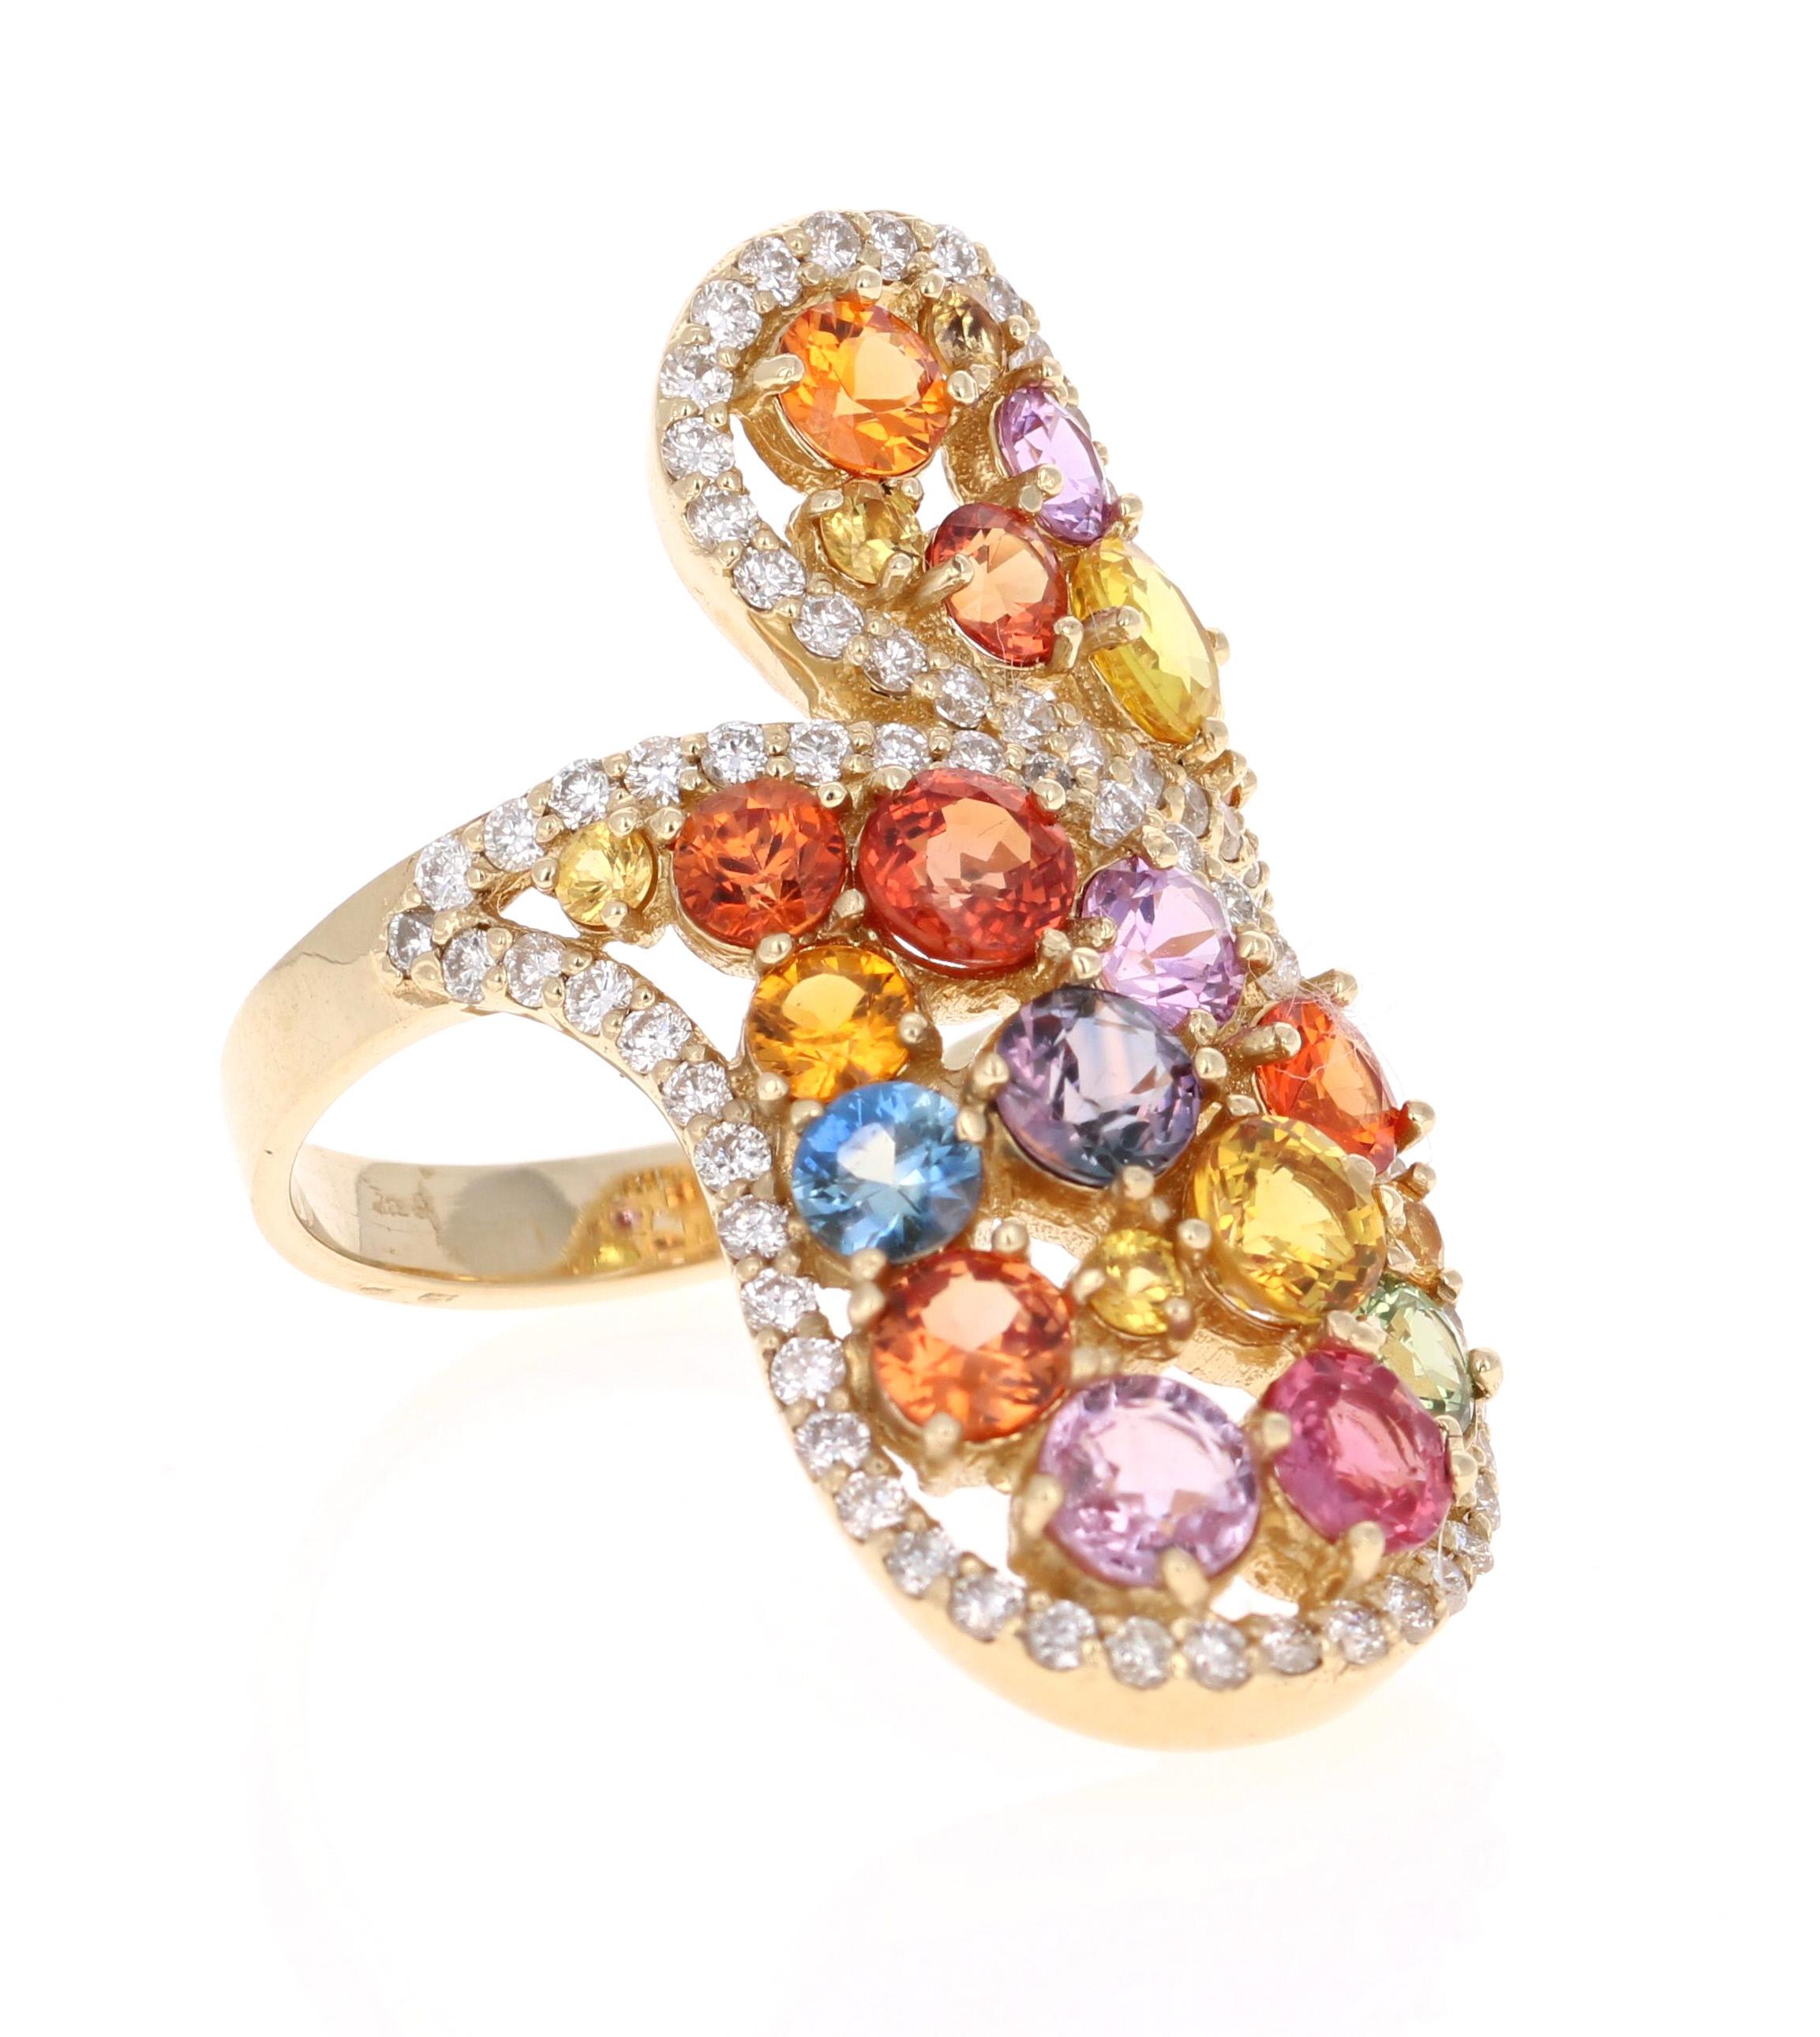 Super gorgeous and uniquely designed 5.27 Carat Multi-Colored Sapphire and Diamond 14K Yellow Gold Cocktail Ring!

This ring has a cluster of 22 Round Cut Multi-Colored Sapphires that weigh 4.47 carats and 73 Round Cut Diamonds that weigh 0.80